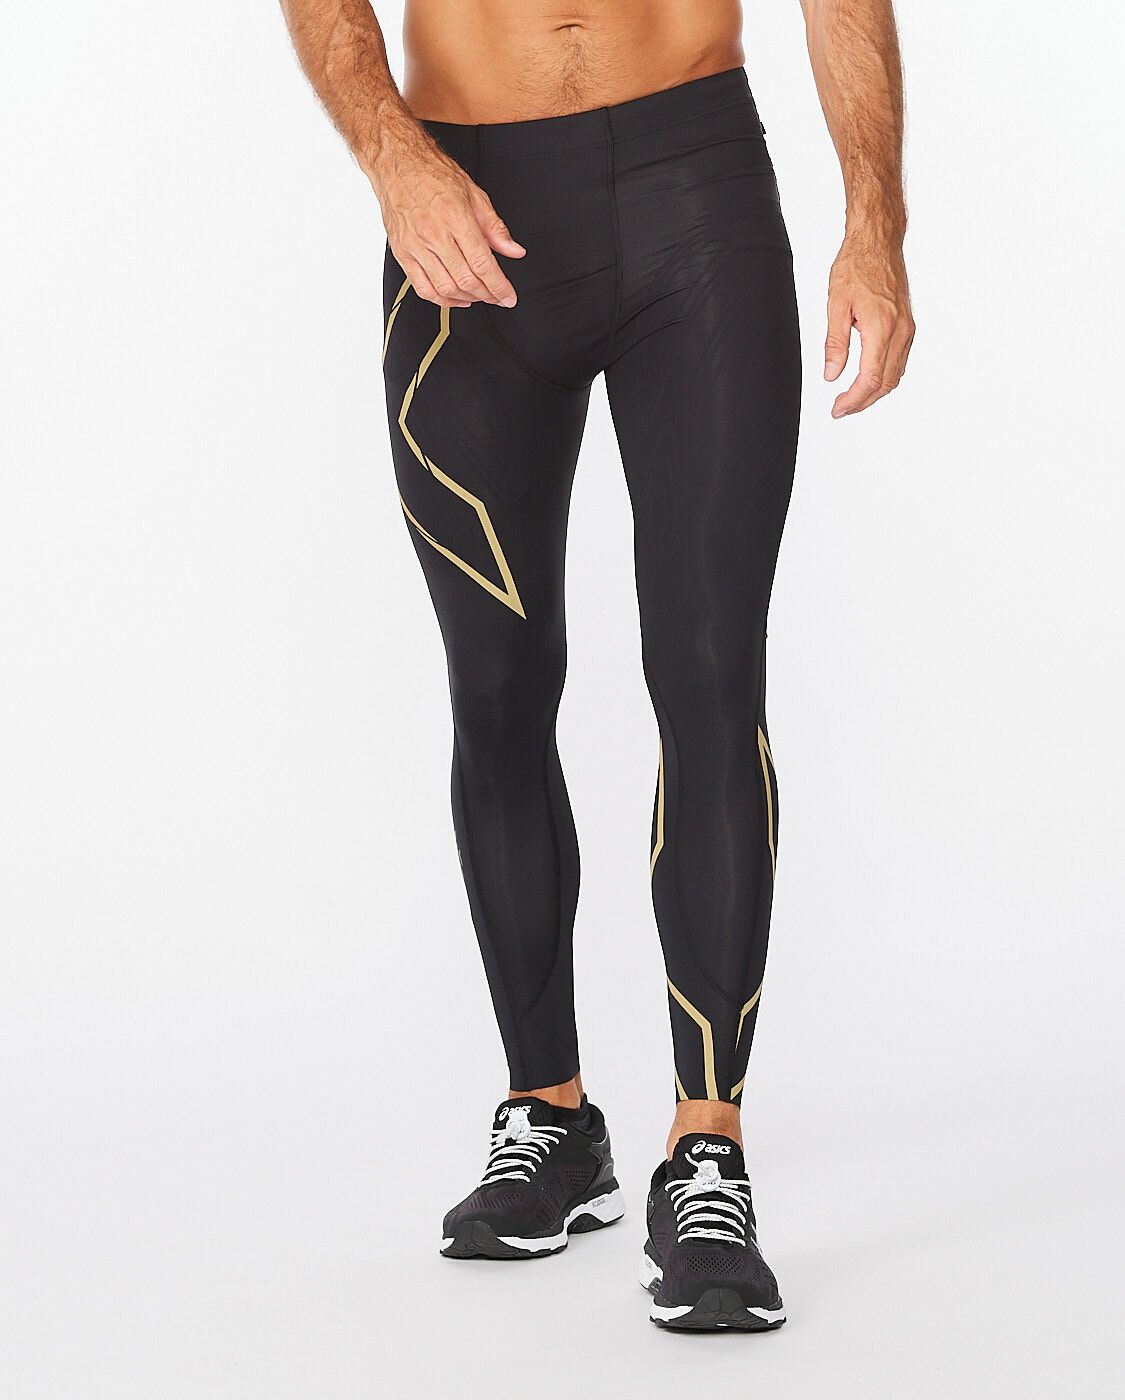  2XU Women's MCS X Train Mid Rise 3/4 Compression Tight  (Black/Gold, Small) : Clothing, Shoes & Jewelry